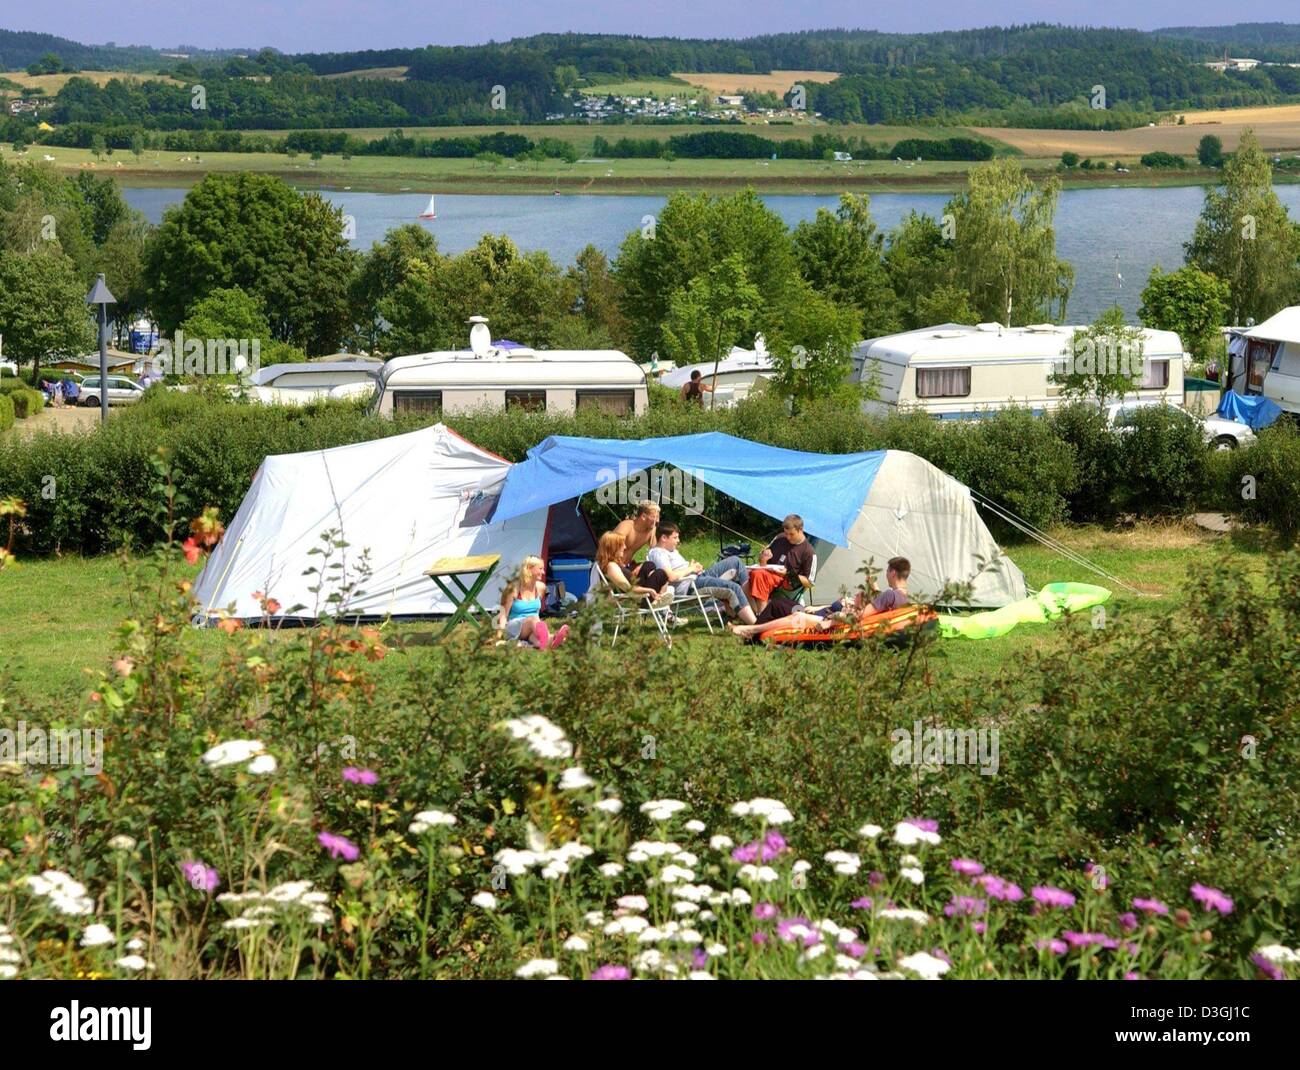 (dpa) - A group of young people are spending their holidays on the Gunzenberg camping site near Poehl dam, eastern Germany, 5 August 2004. The reservoir lake is one of the most attractive destinations for tourists in the Vogtland region. Stock Photo